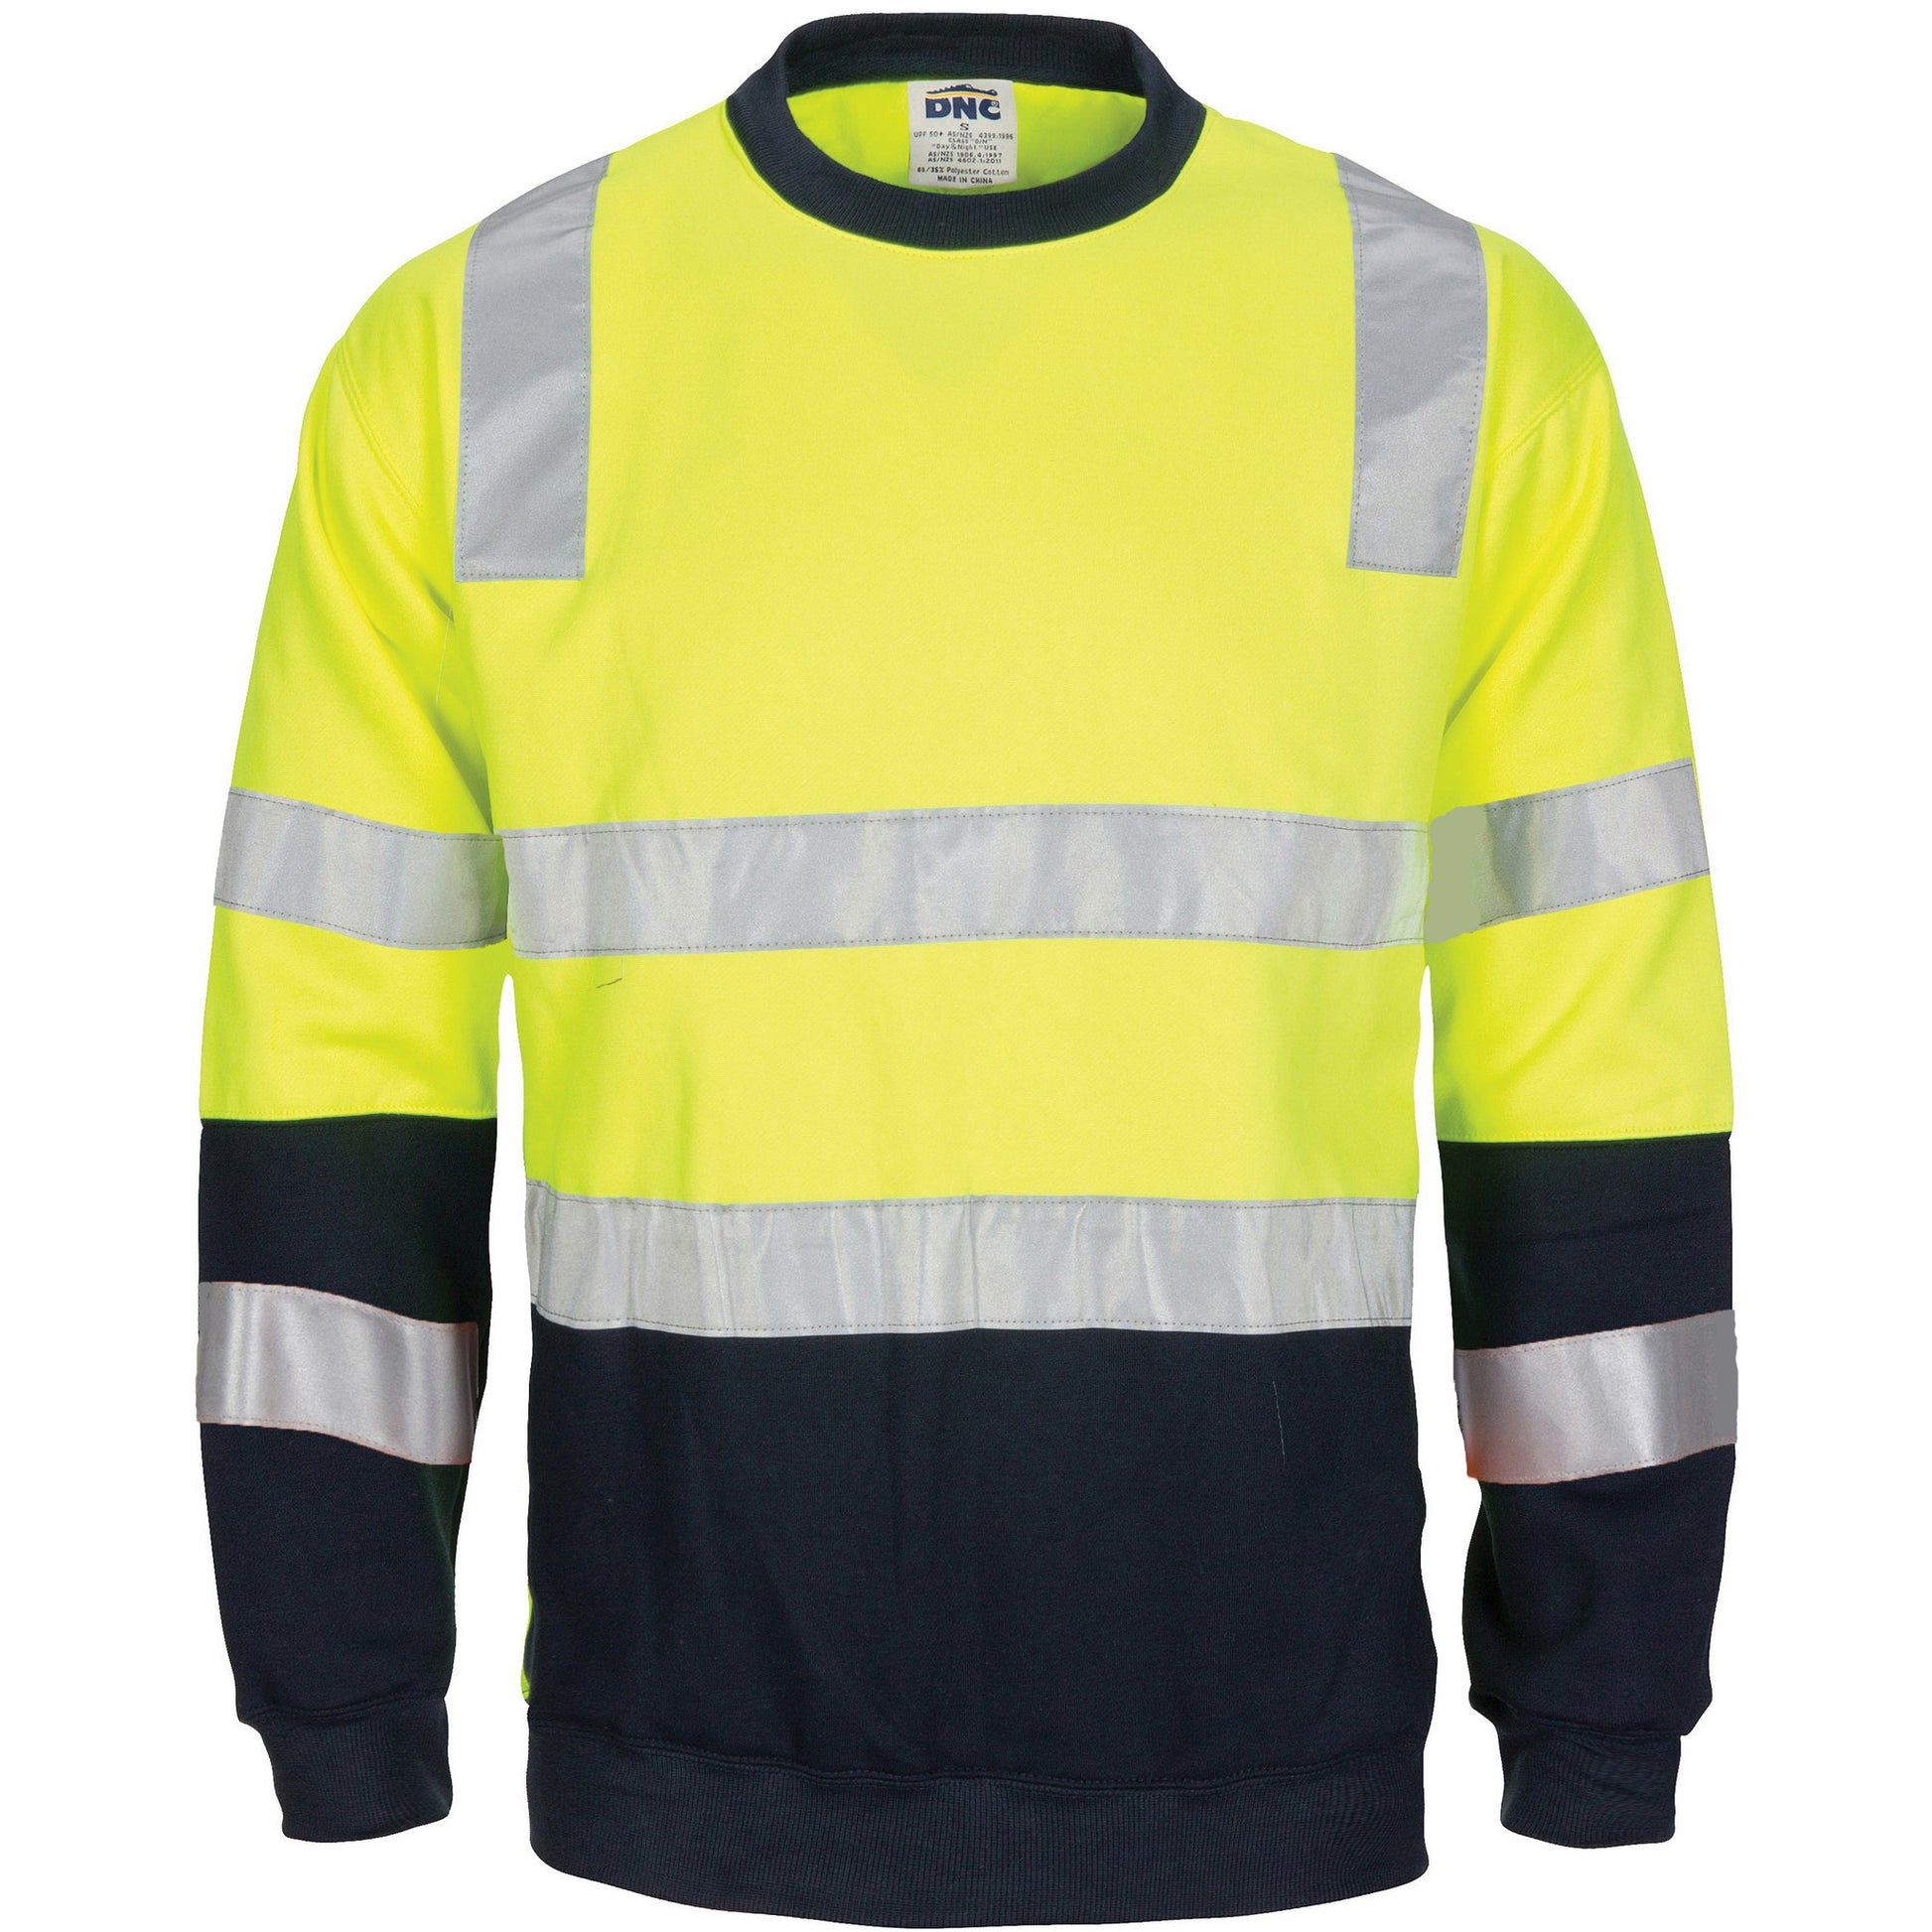 DNC Hivis 2 Tone, Crew-neck Fleecy Sweat Shirt With Shoulders, Double Hoop Body And Arms Csr R/tape (3723)